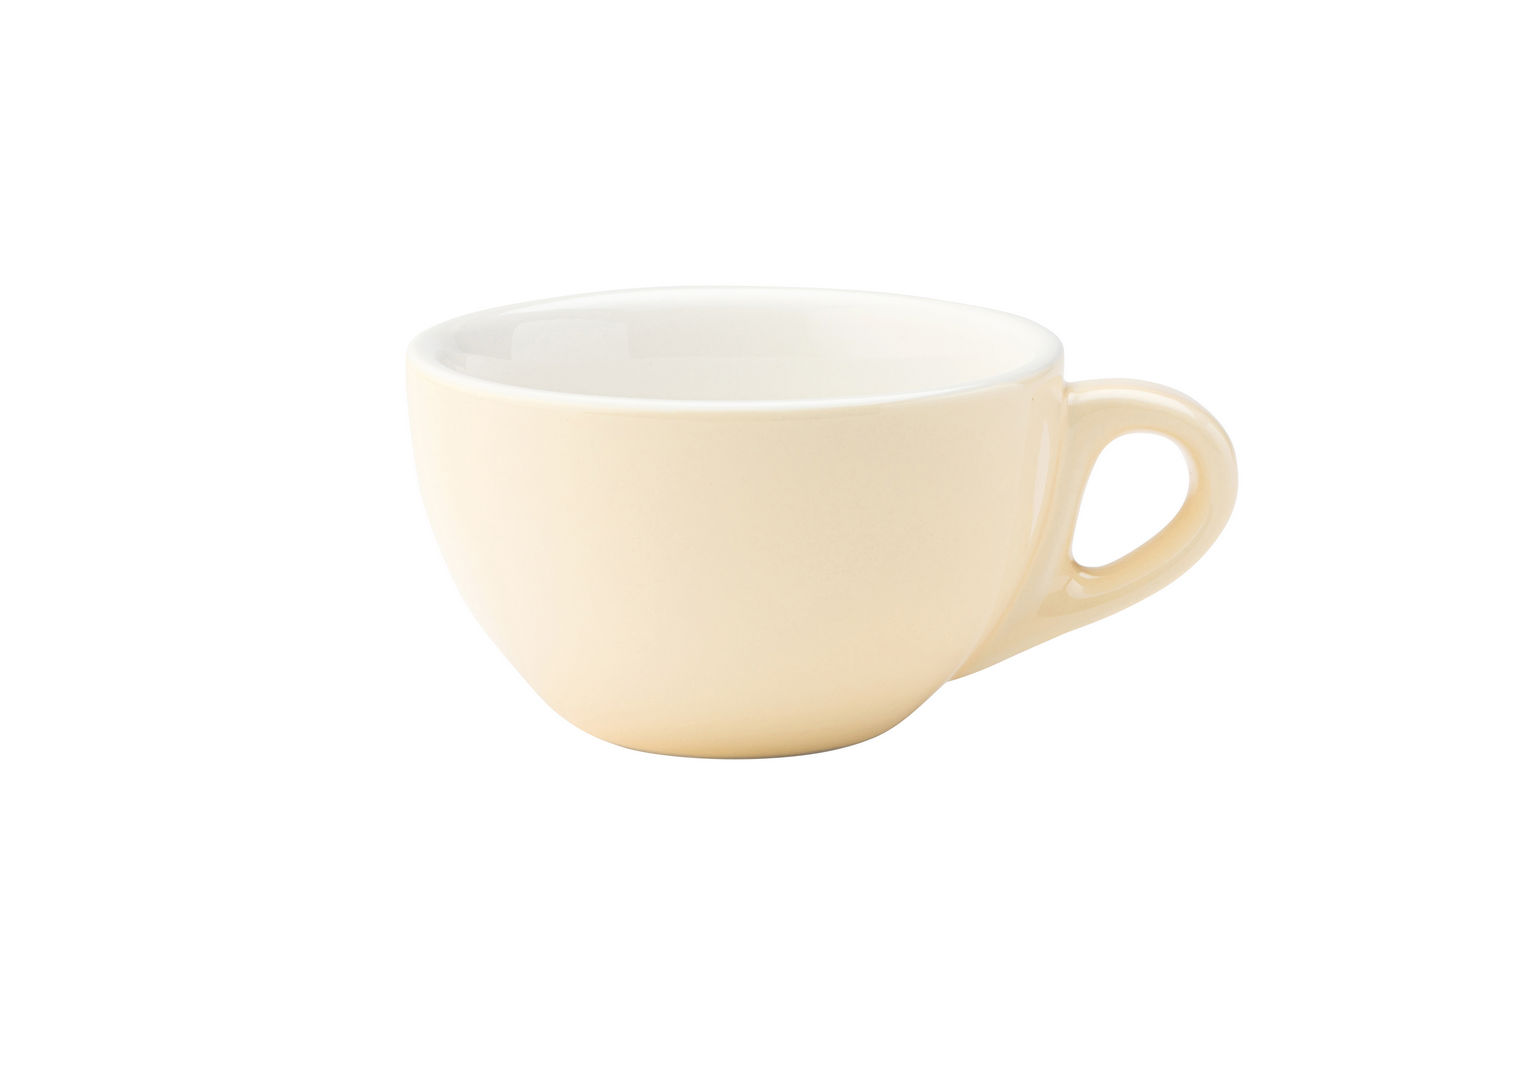 Barista Cappuccino Cream Cup 7oz (20cl) - CT8146-000000-B01012 (Pack of 12)